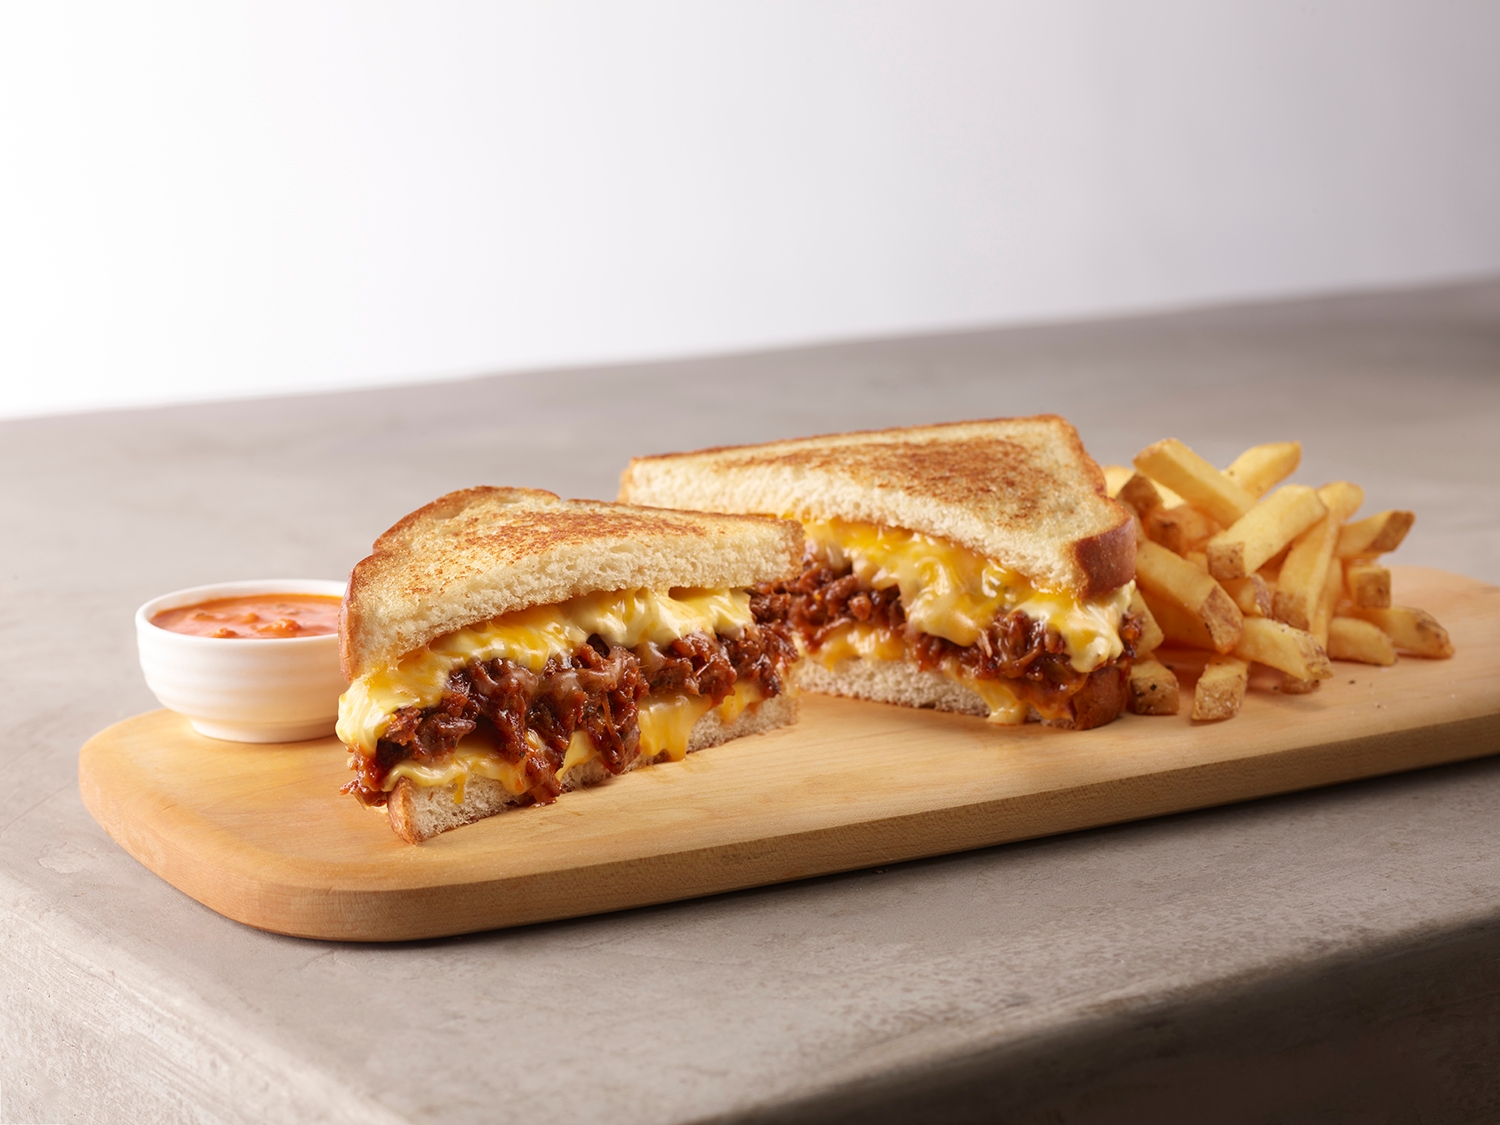 Chopped brisket on thick sliced bread with cheddar, jack and American cheese. Served with crisp fries and tomato bisque dip.